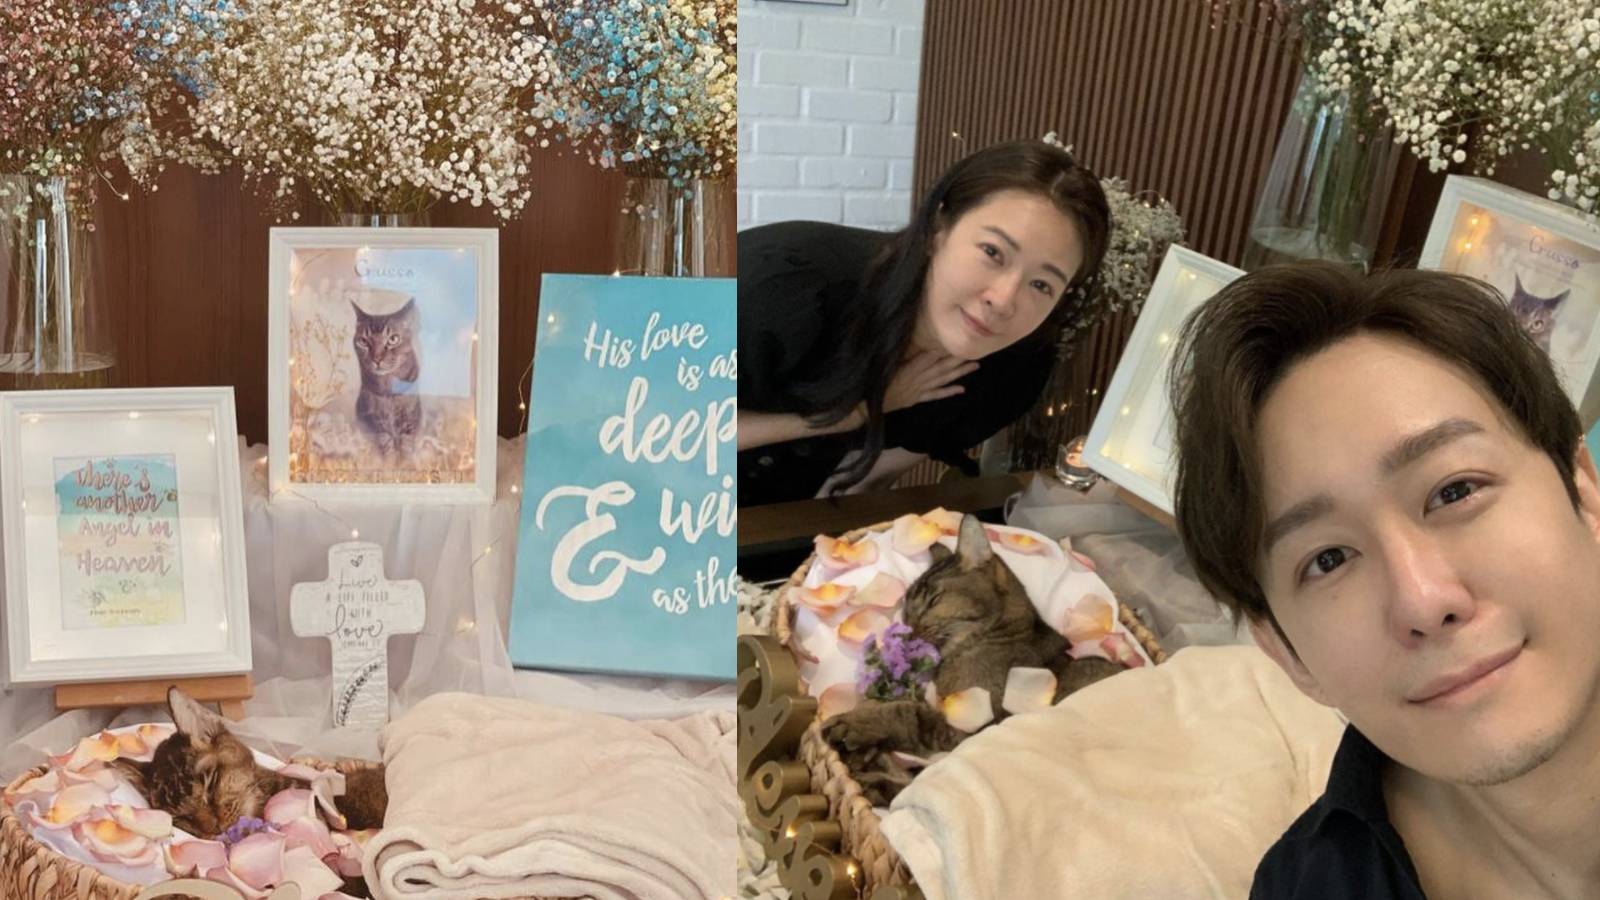 Jesseca Liu And Jeremy Chan Mourn Their Cat’s Death; Say He Went To “Chop A Seat” In Heaven First